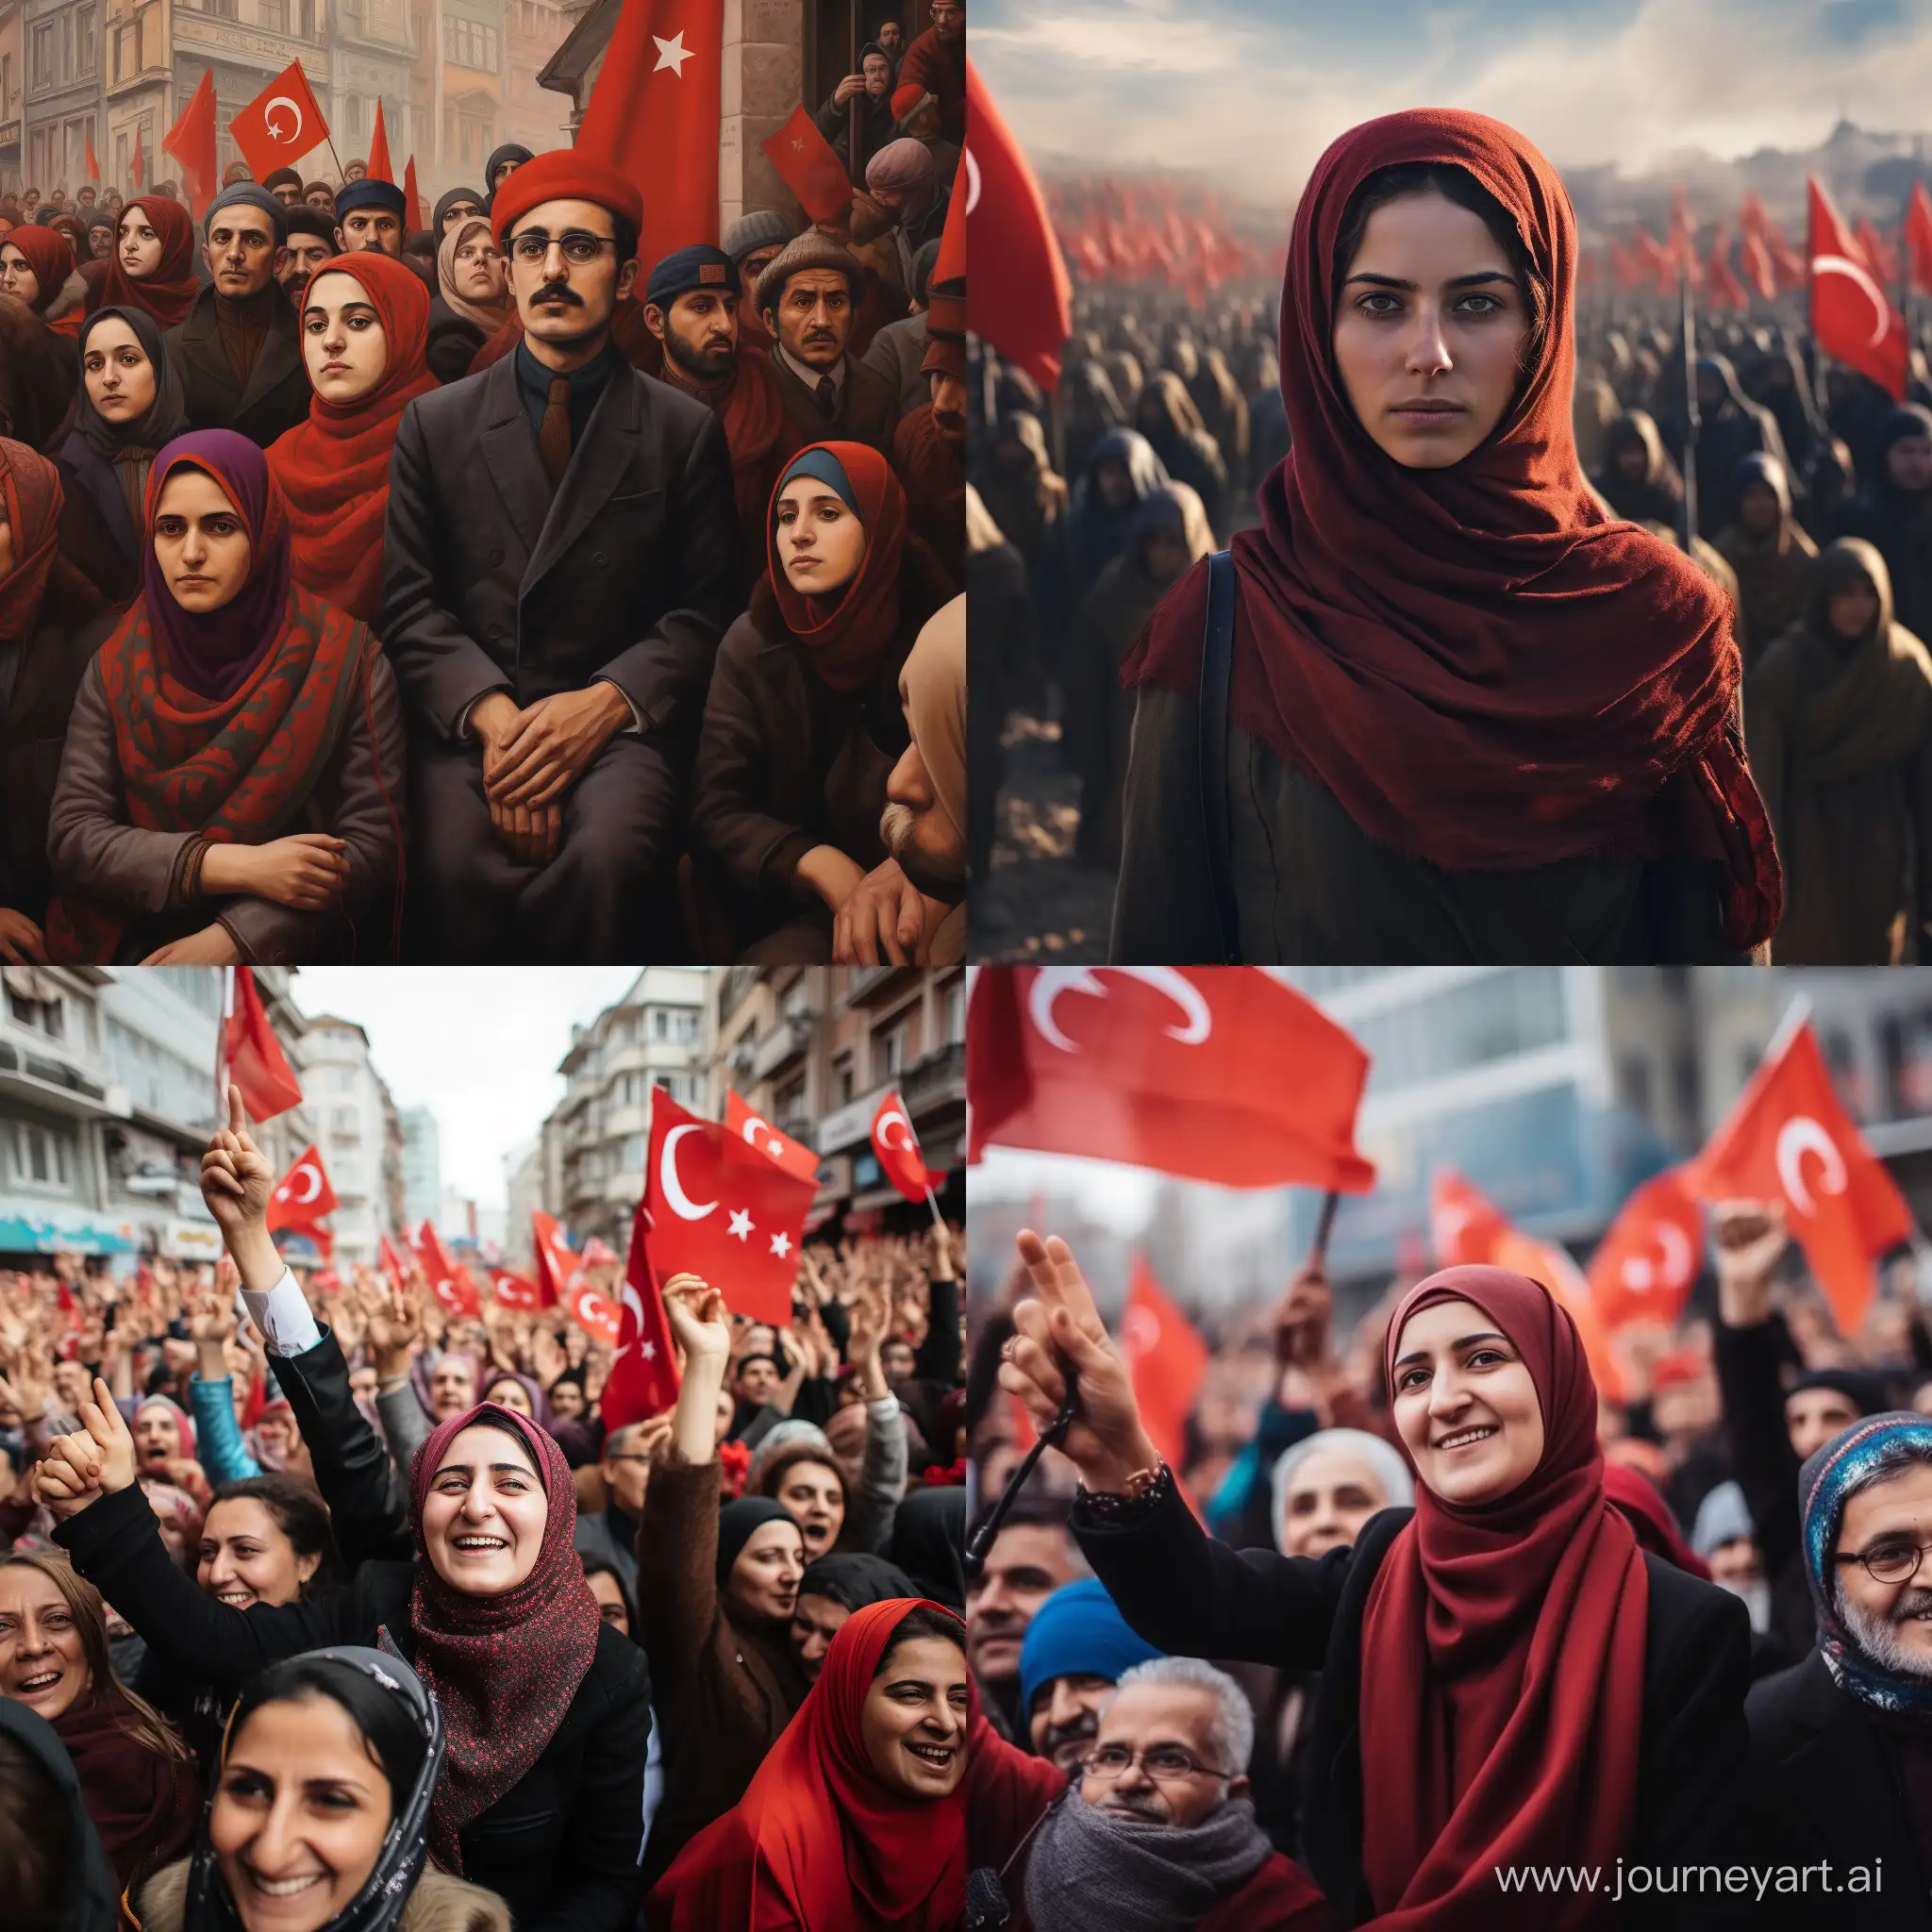 Future-Trends-A-Glimpse-into-the-Lives-of-Turkish-People-in-Ten-Years